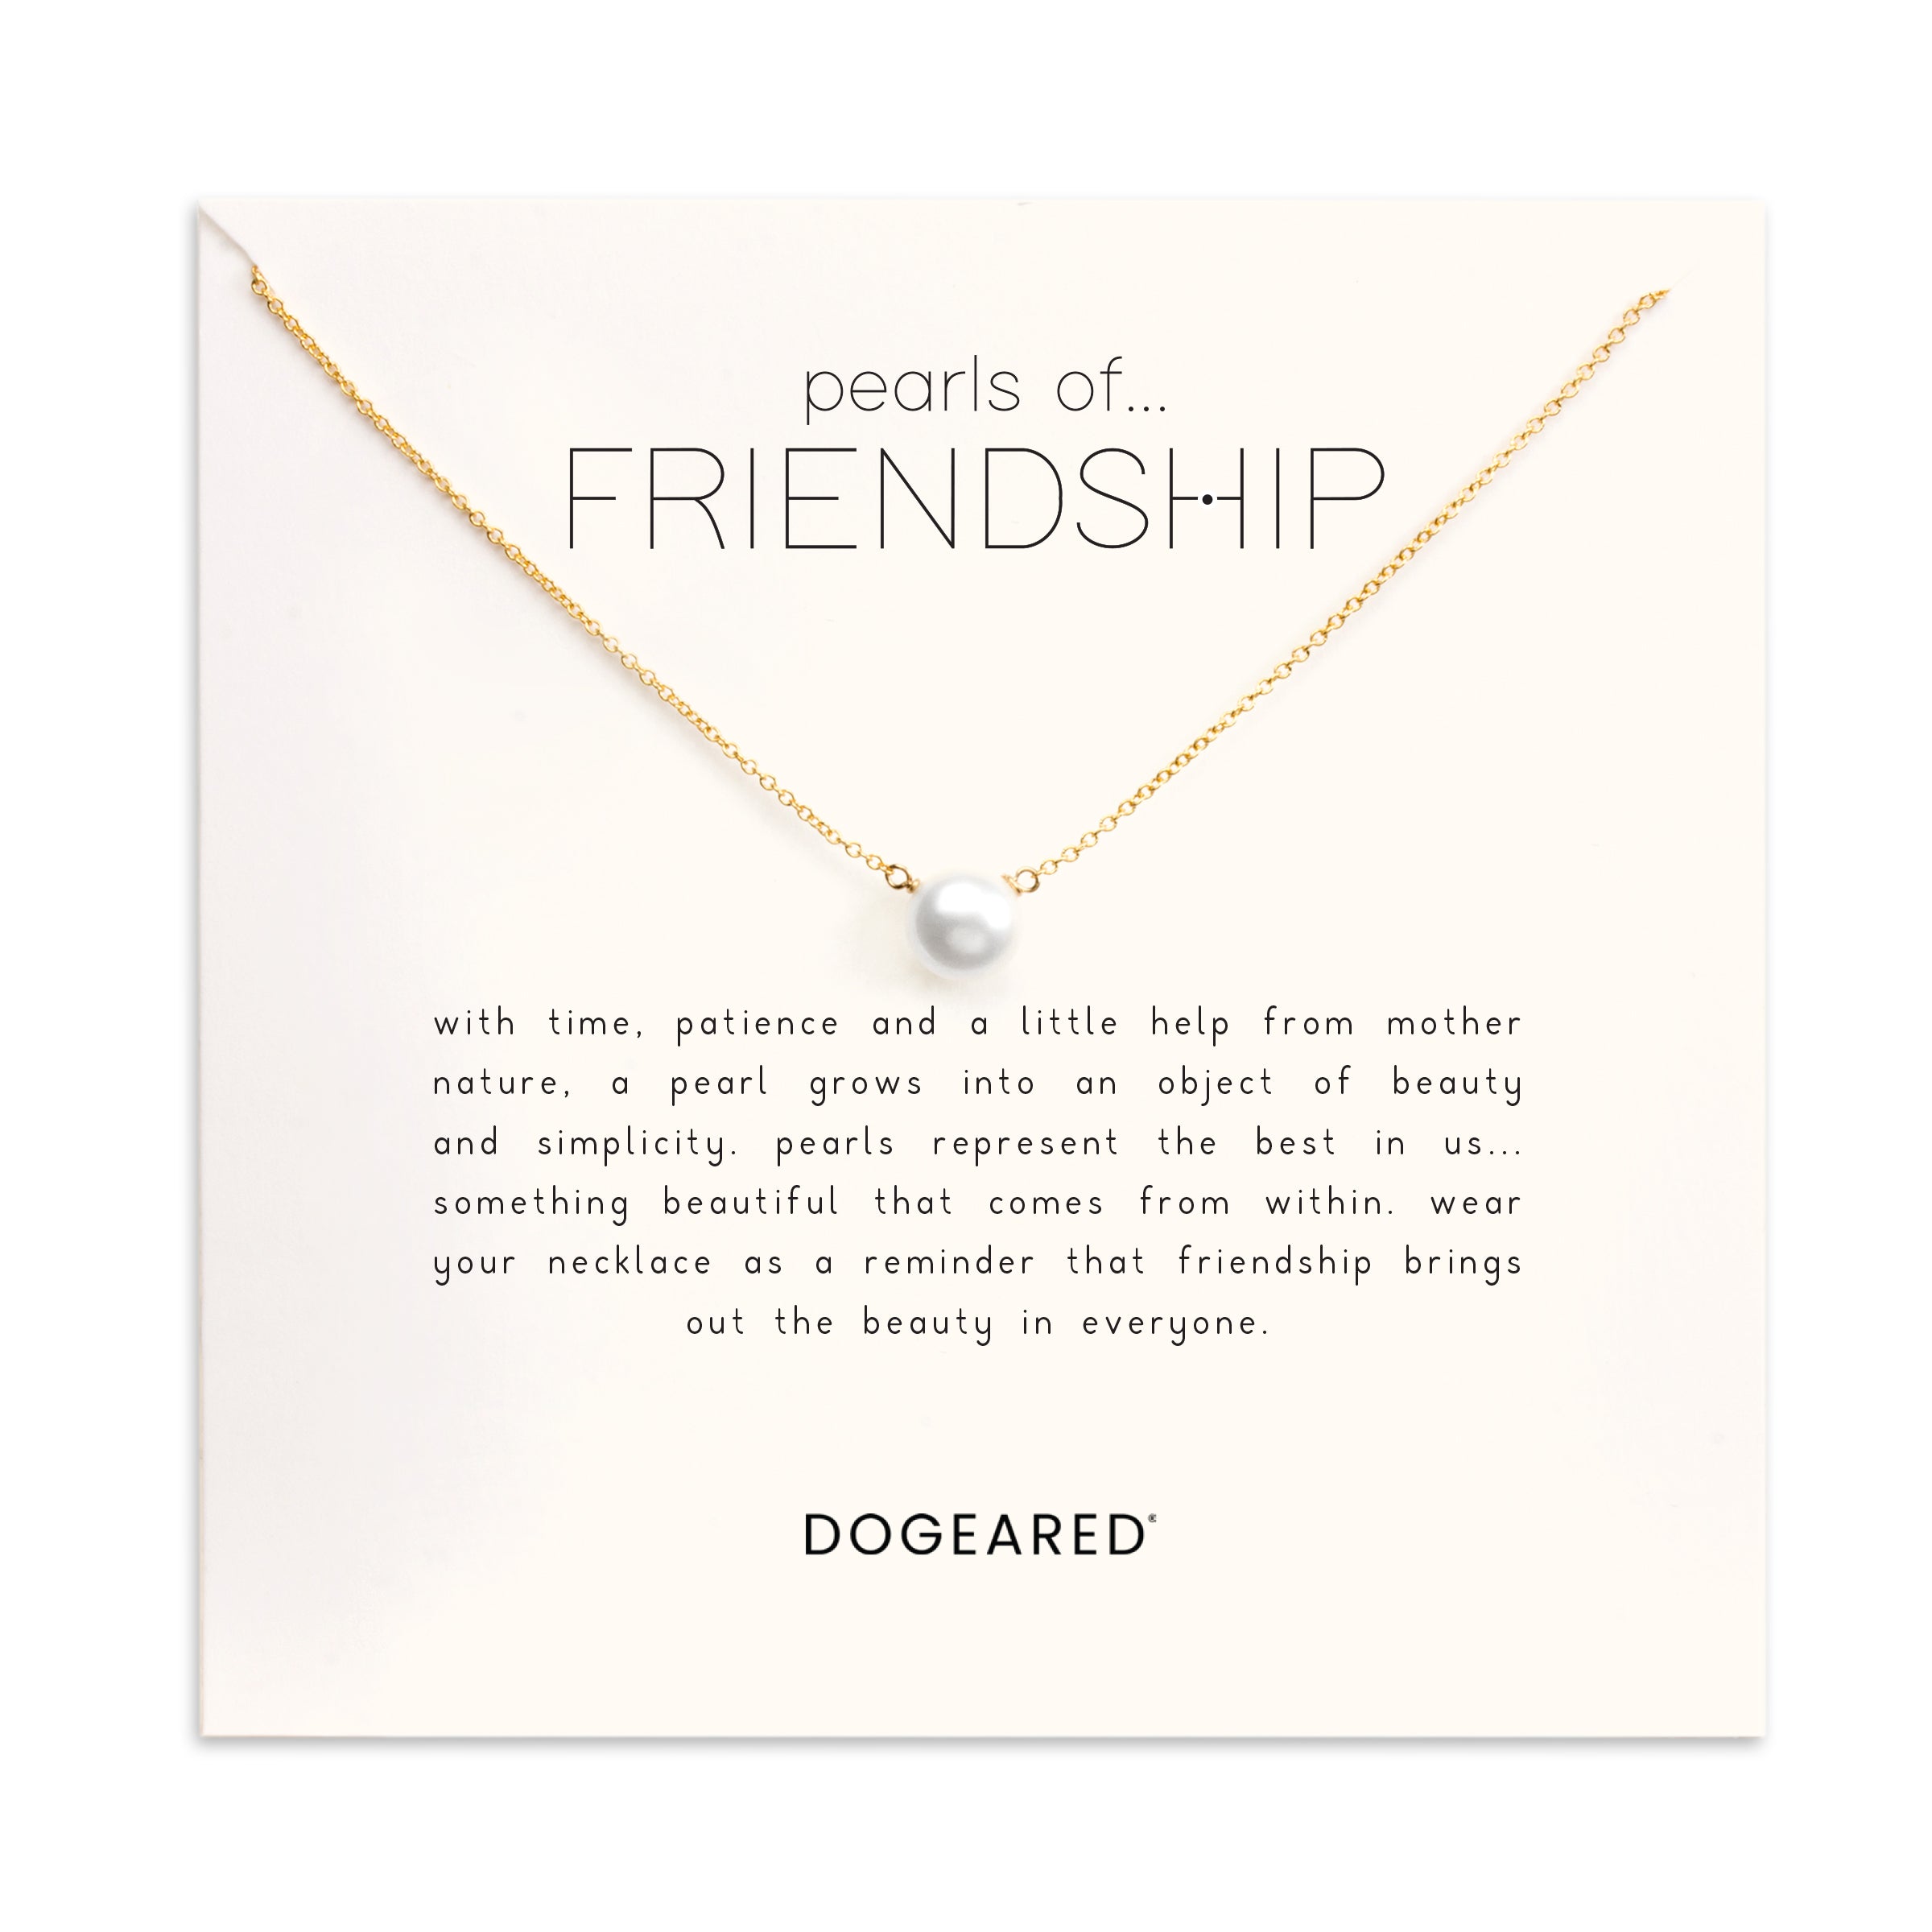 Pearls of friendship large white pearl necklace - Dogeared